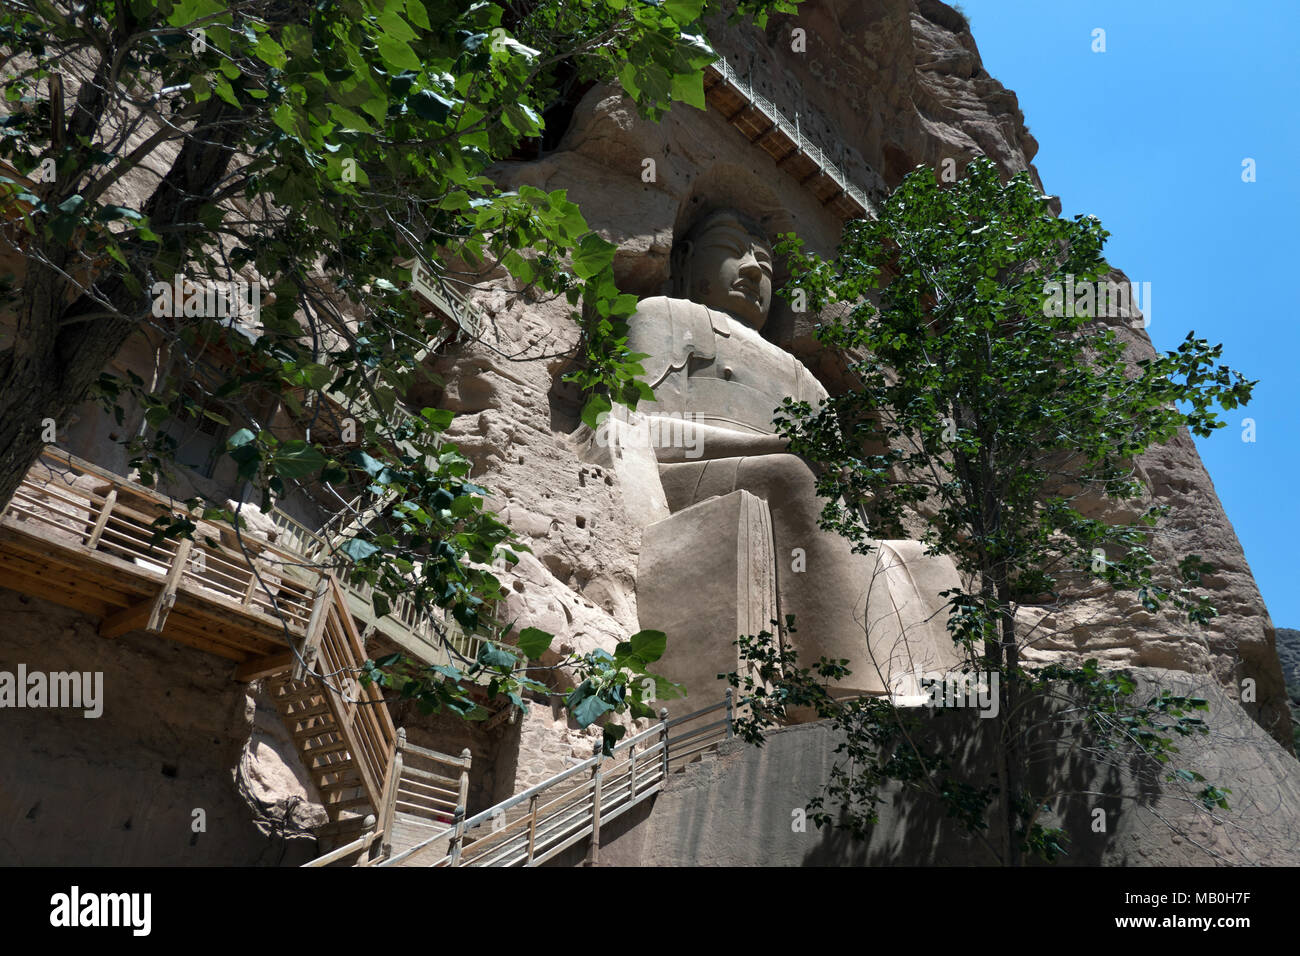 The Bingling Temple, or Bingling Si, in Gansu province, China, Asia. Grottoes, caves and caverns with giant Maitreya Buddha and Buddhist statues. Chin Stock Photo